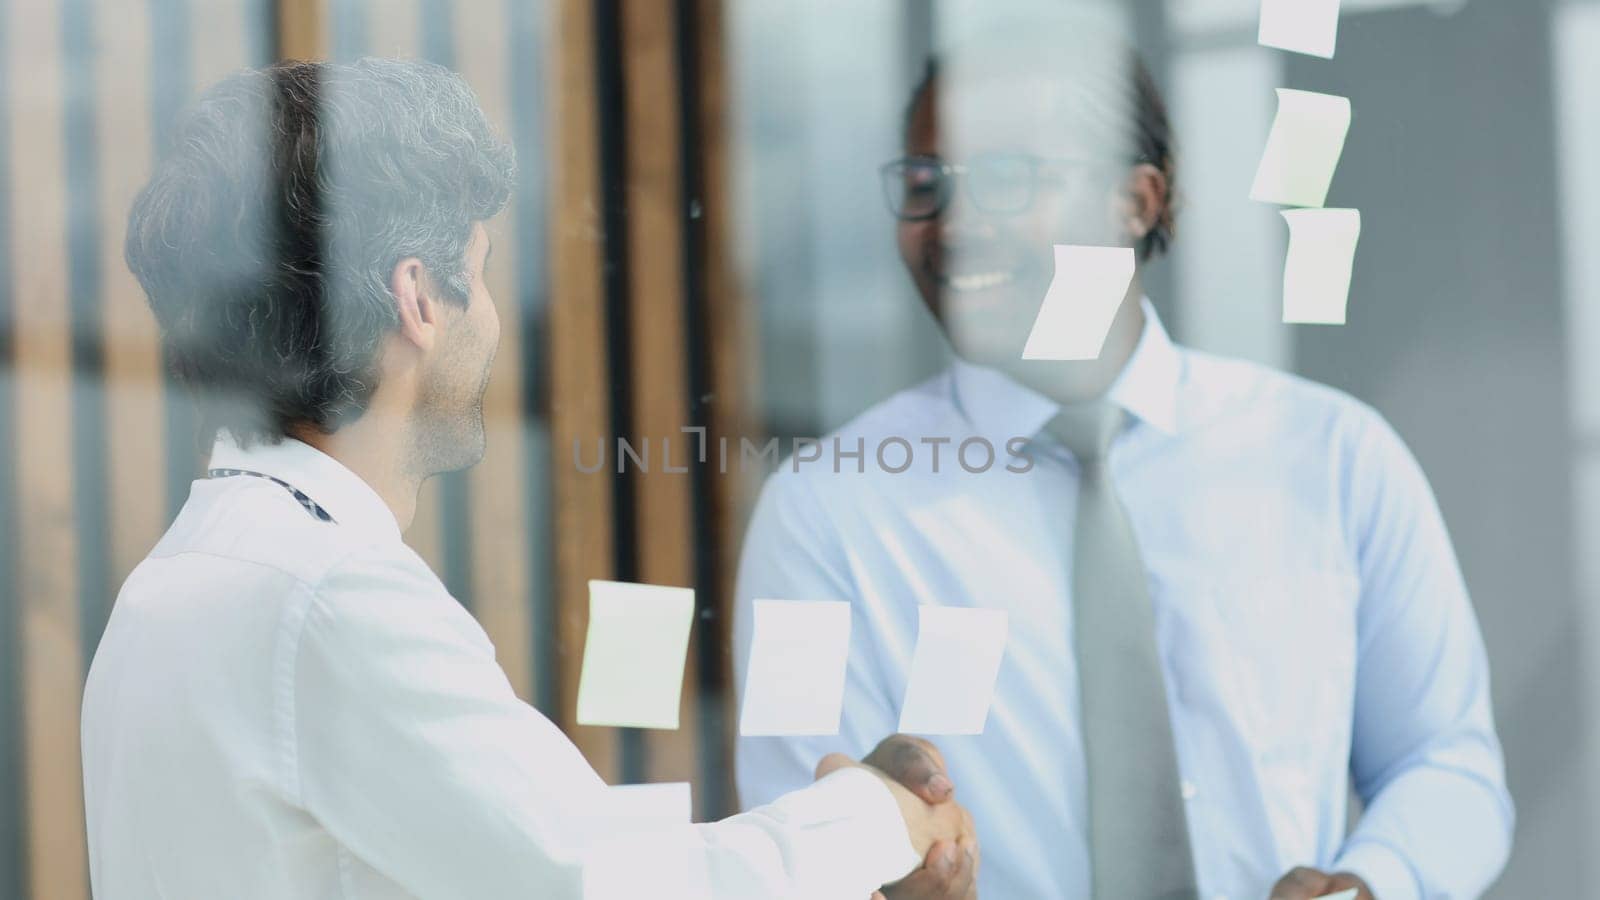 two businessmen discussing business strategy. standing behind the glass looking at stickers.